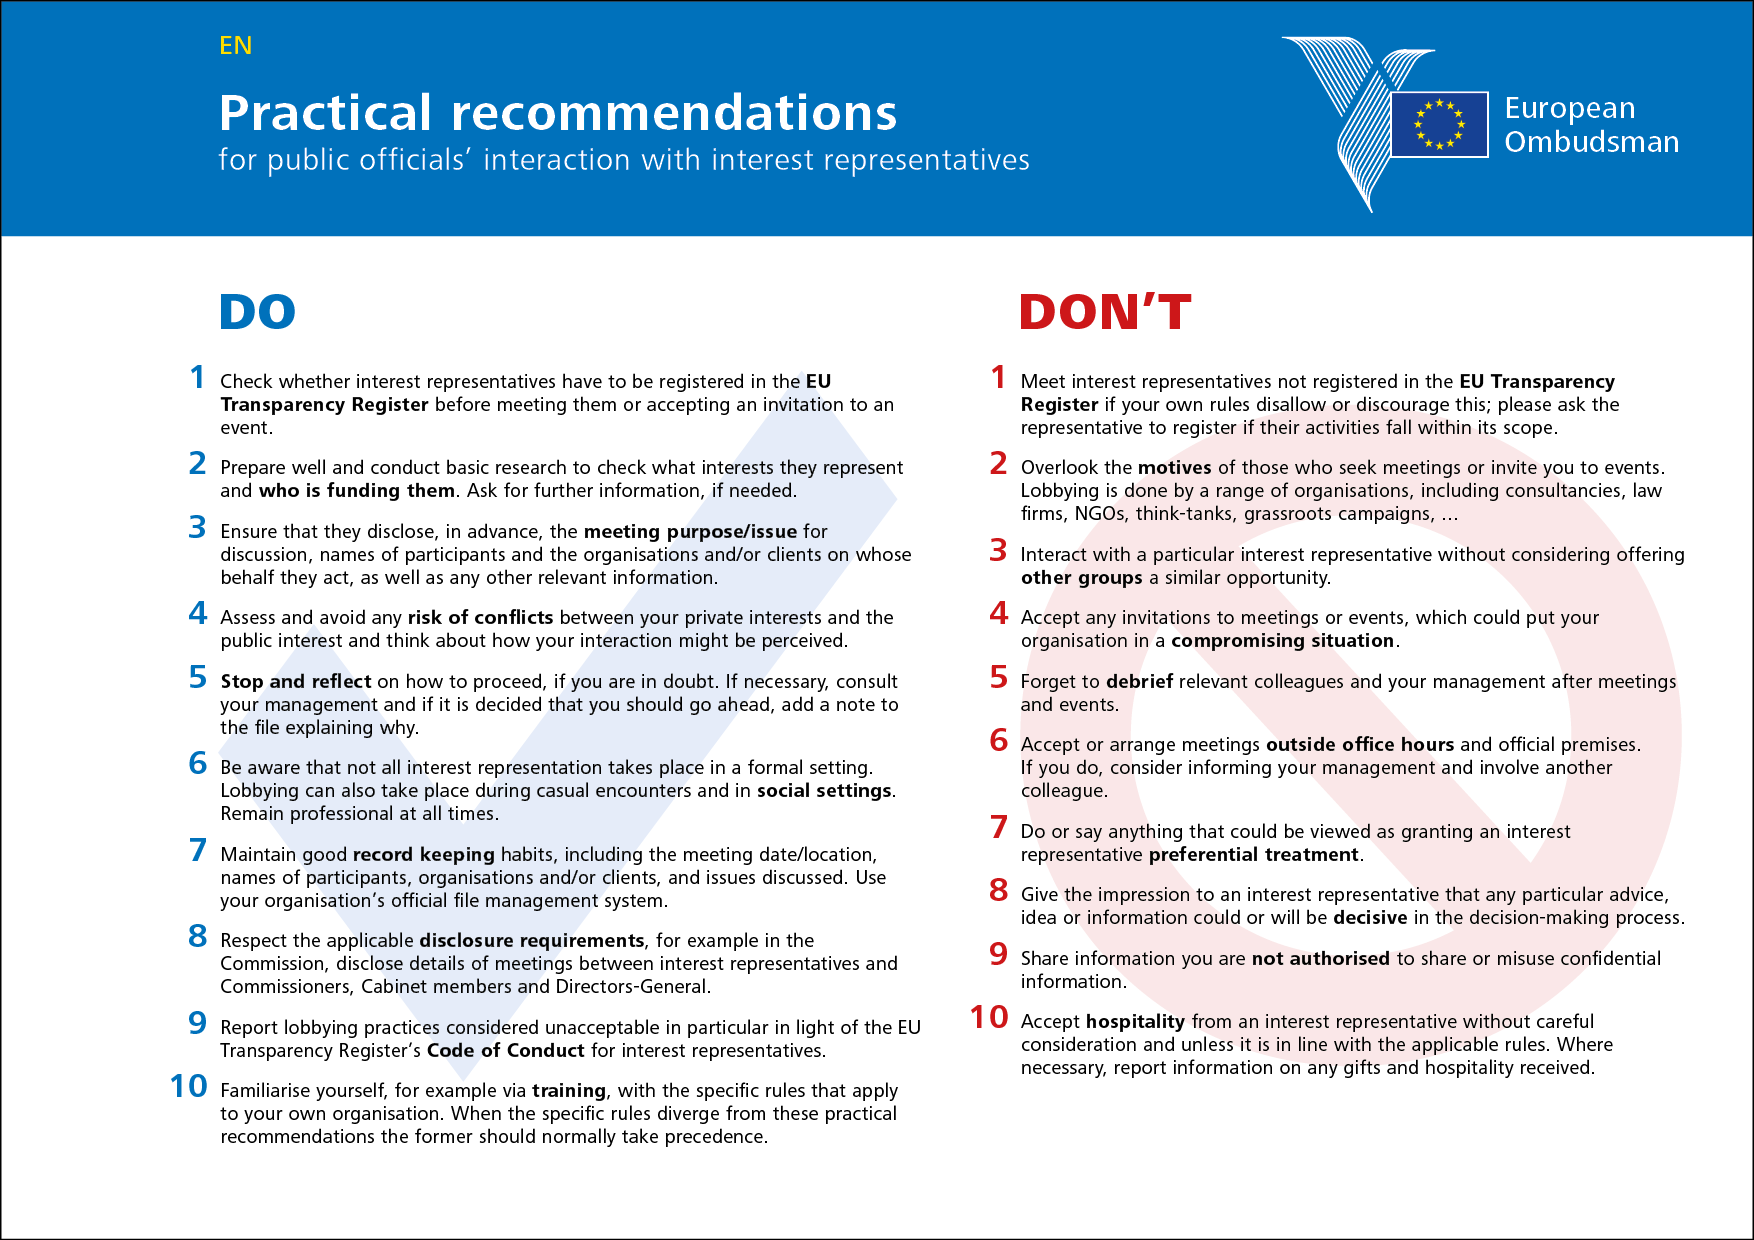 Practical recommendations for public officials’ interaction with interest representatives